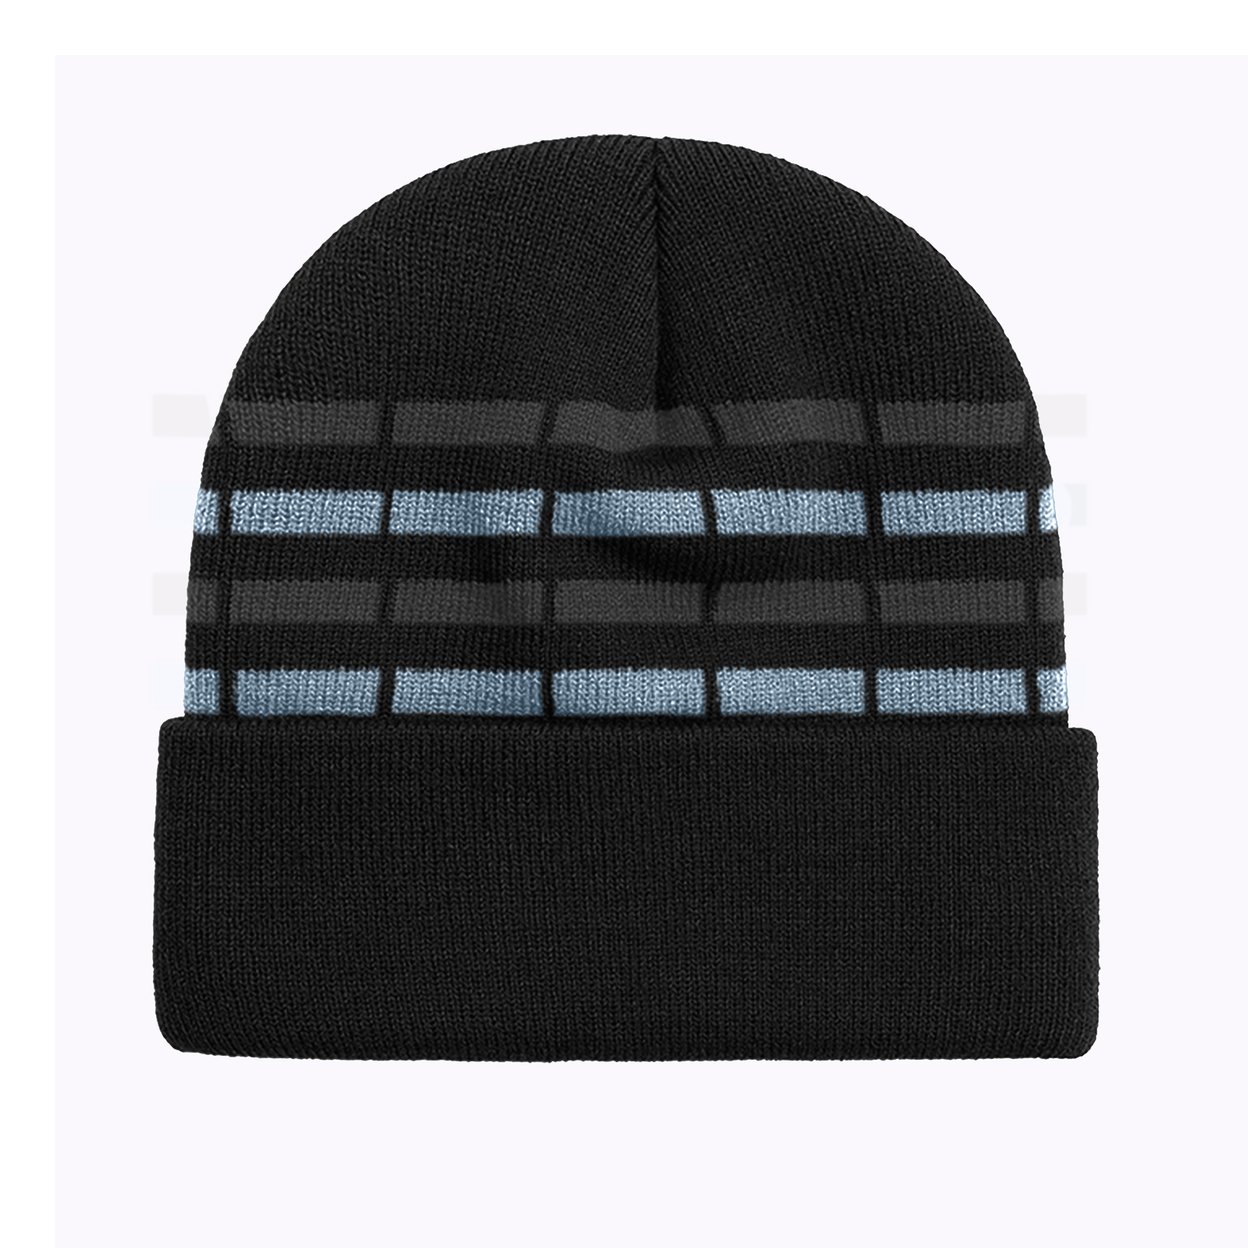 2-Pack Men's Winter Warm Cozy Knit Cuffed Solid & Striped Beanie Hat With Faux Fur Lining - Black Solid / Grey Striped